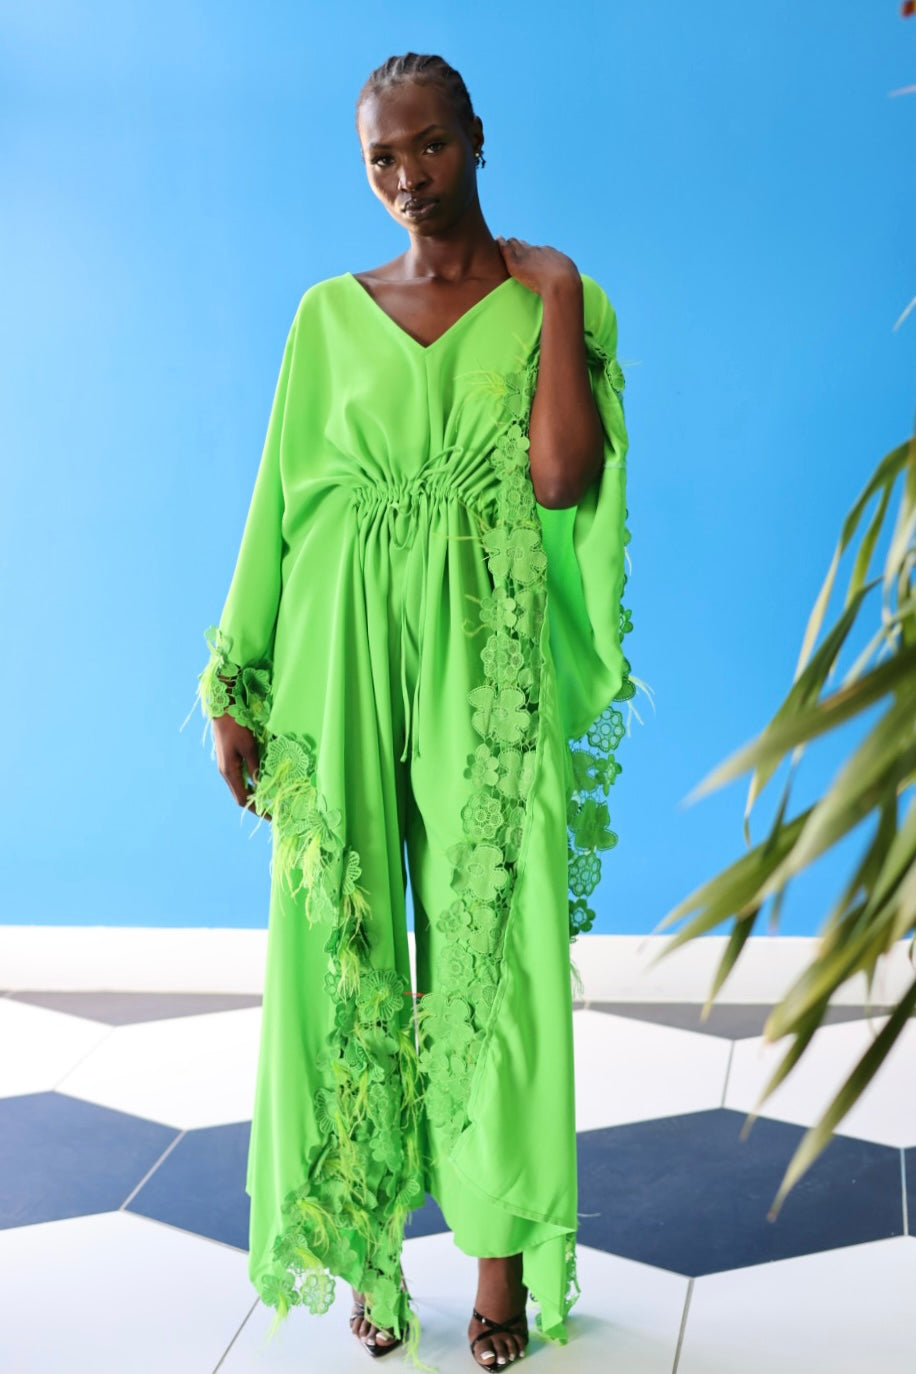 The Poppy Floral Jumpsuit in Green has gorgeous floral lace at the edge of the fabric, along with faux feathers that create a fun texture.